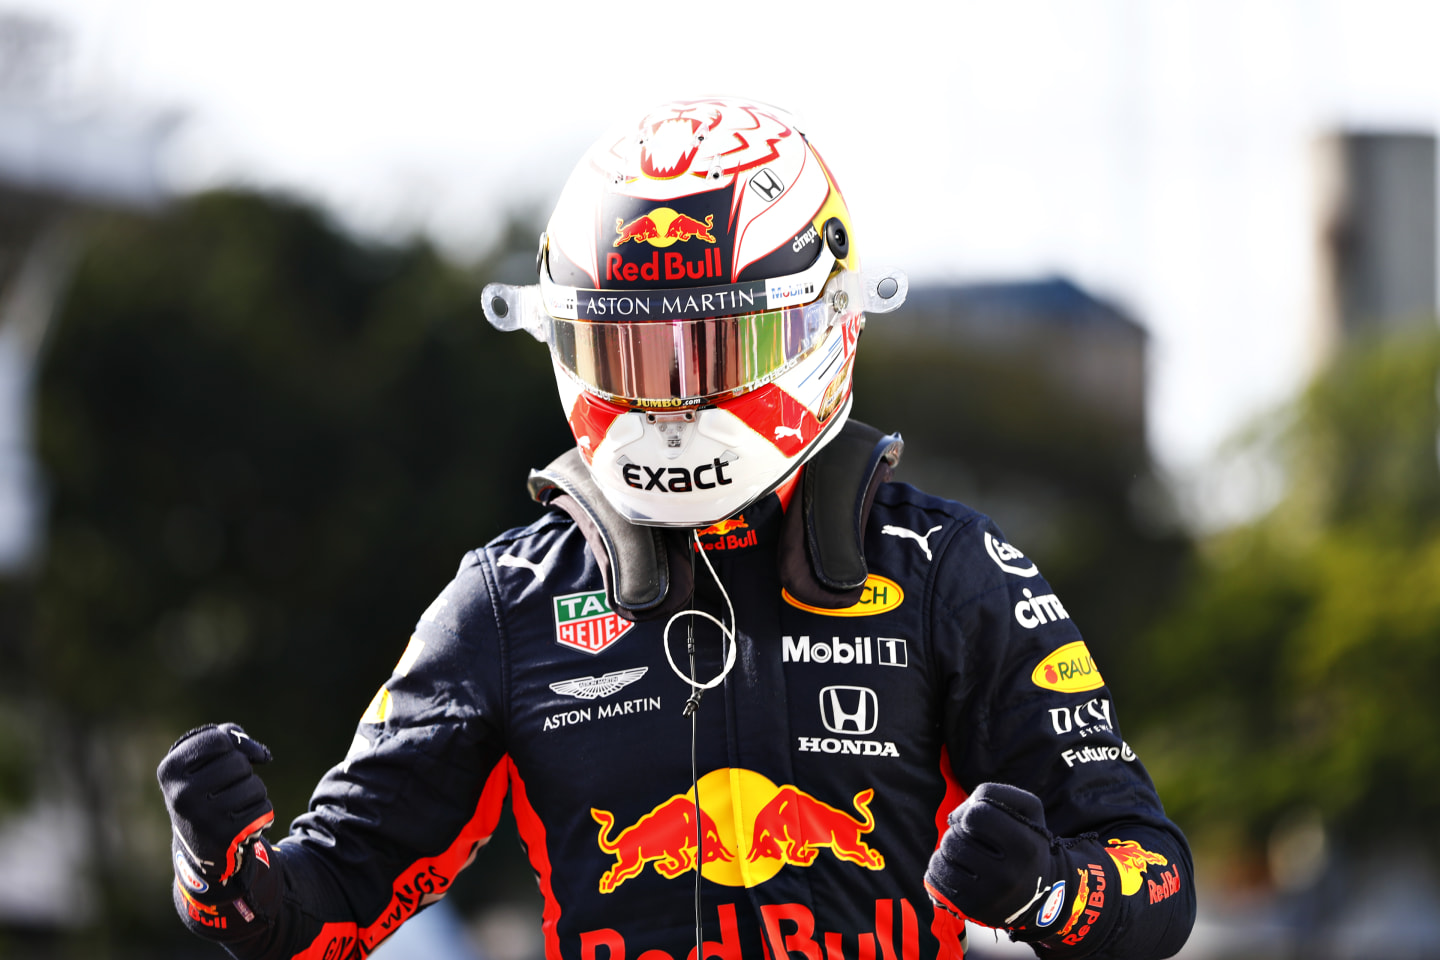 SAO PAULO, BRAZIL - NOVEMBER 16: Pole position qualifier Max Verstappen of Netherlands and Red Bull